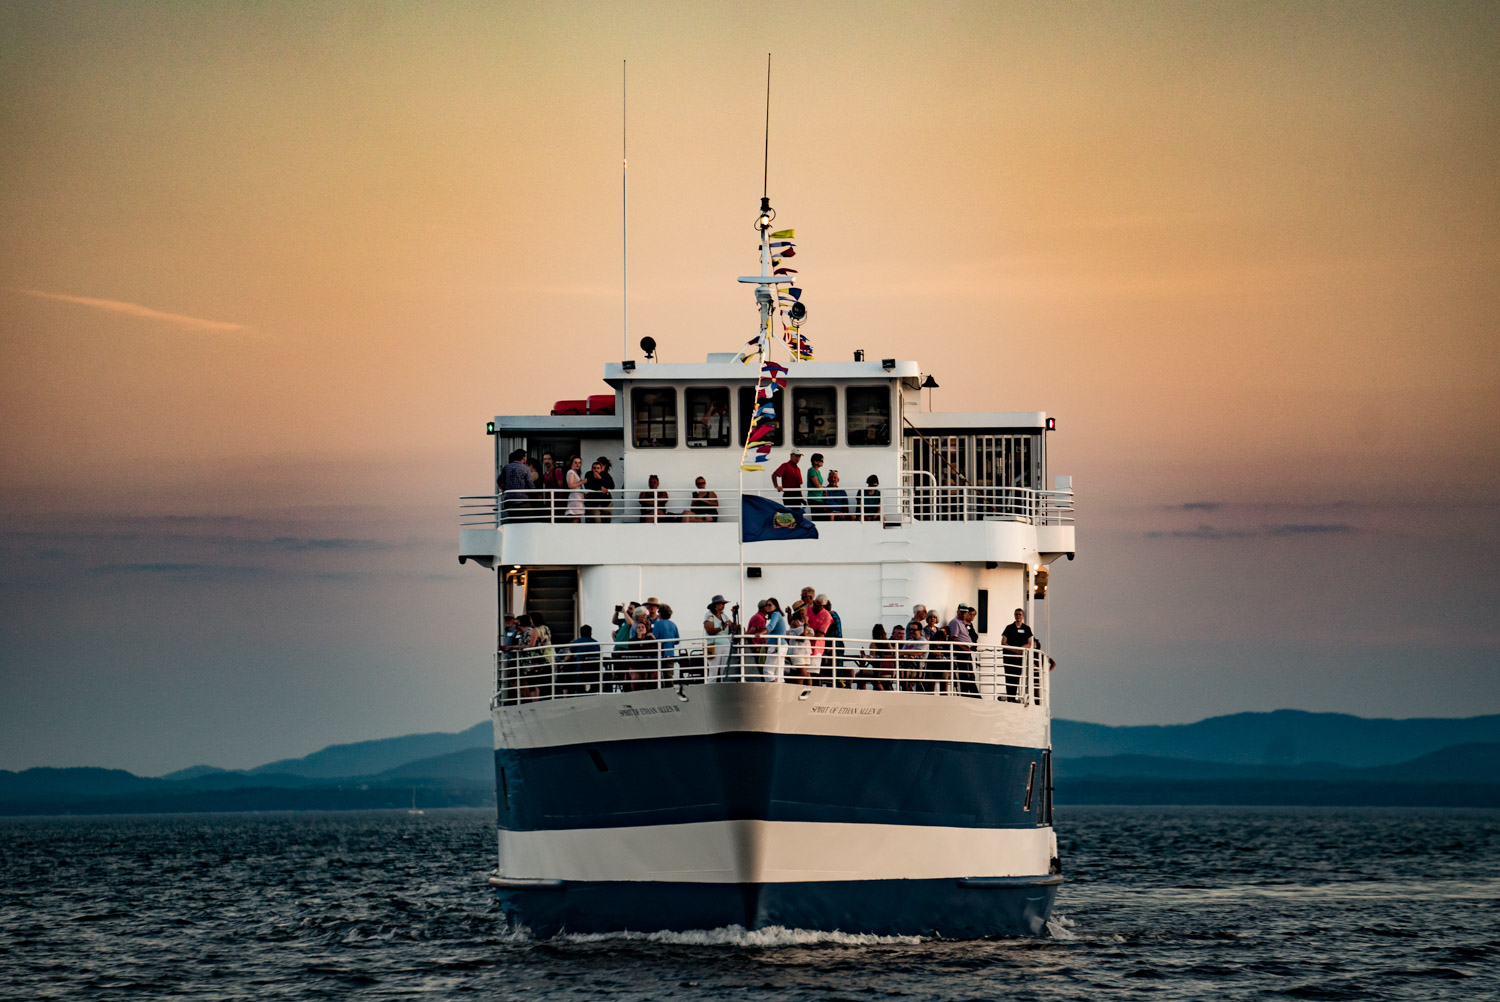 Sunset cruise of the Spirit of Ethan Allen.